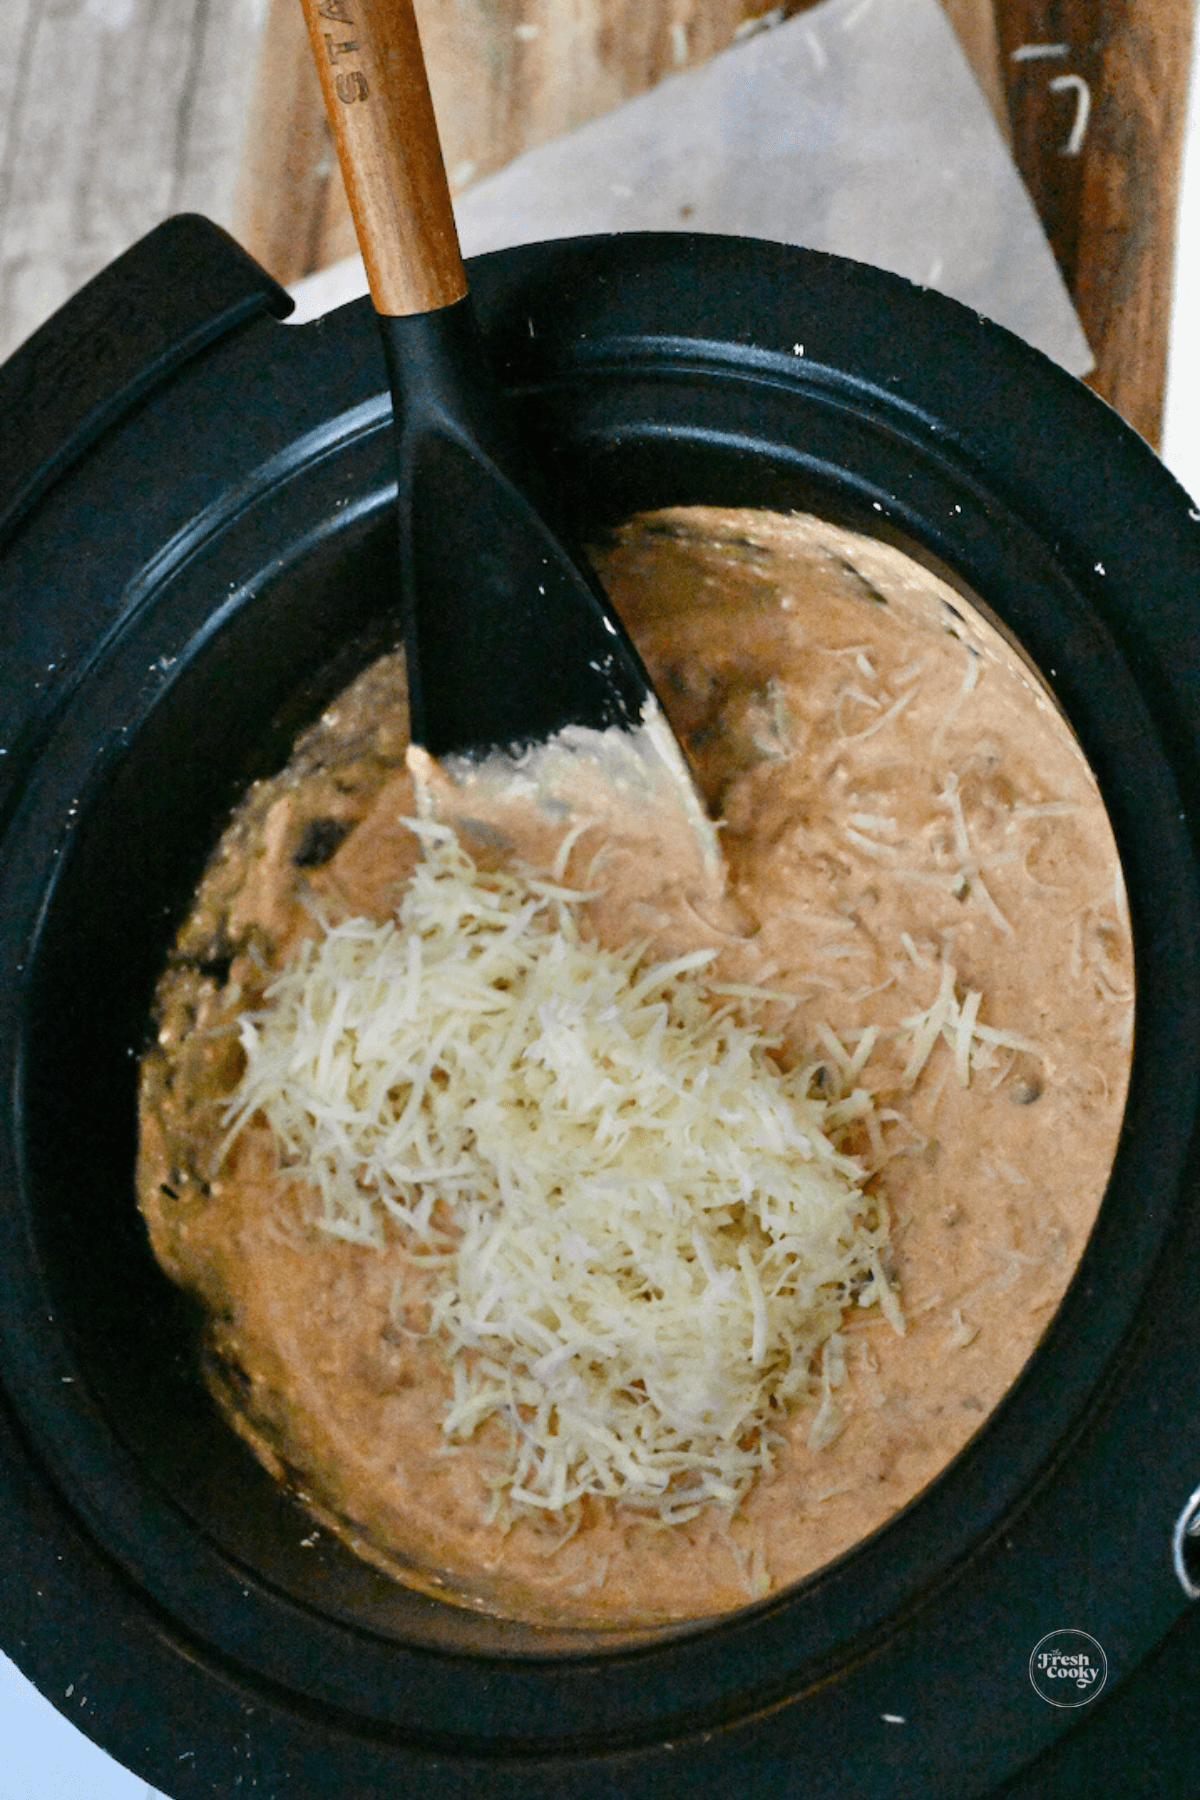 Stir in most of cheese into chili cheese mixture.